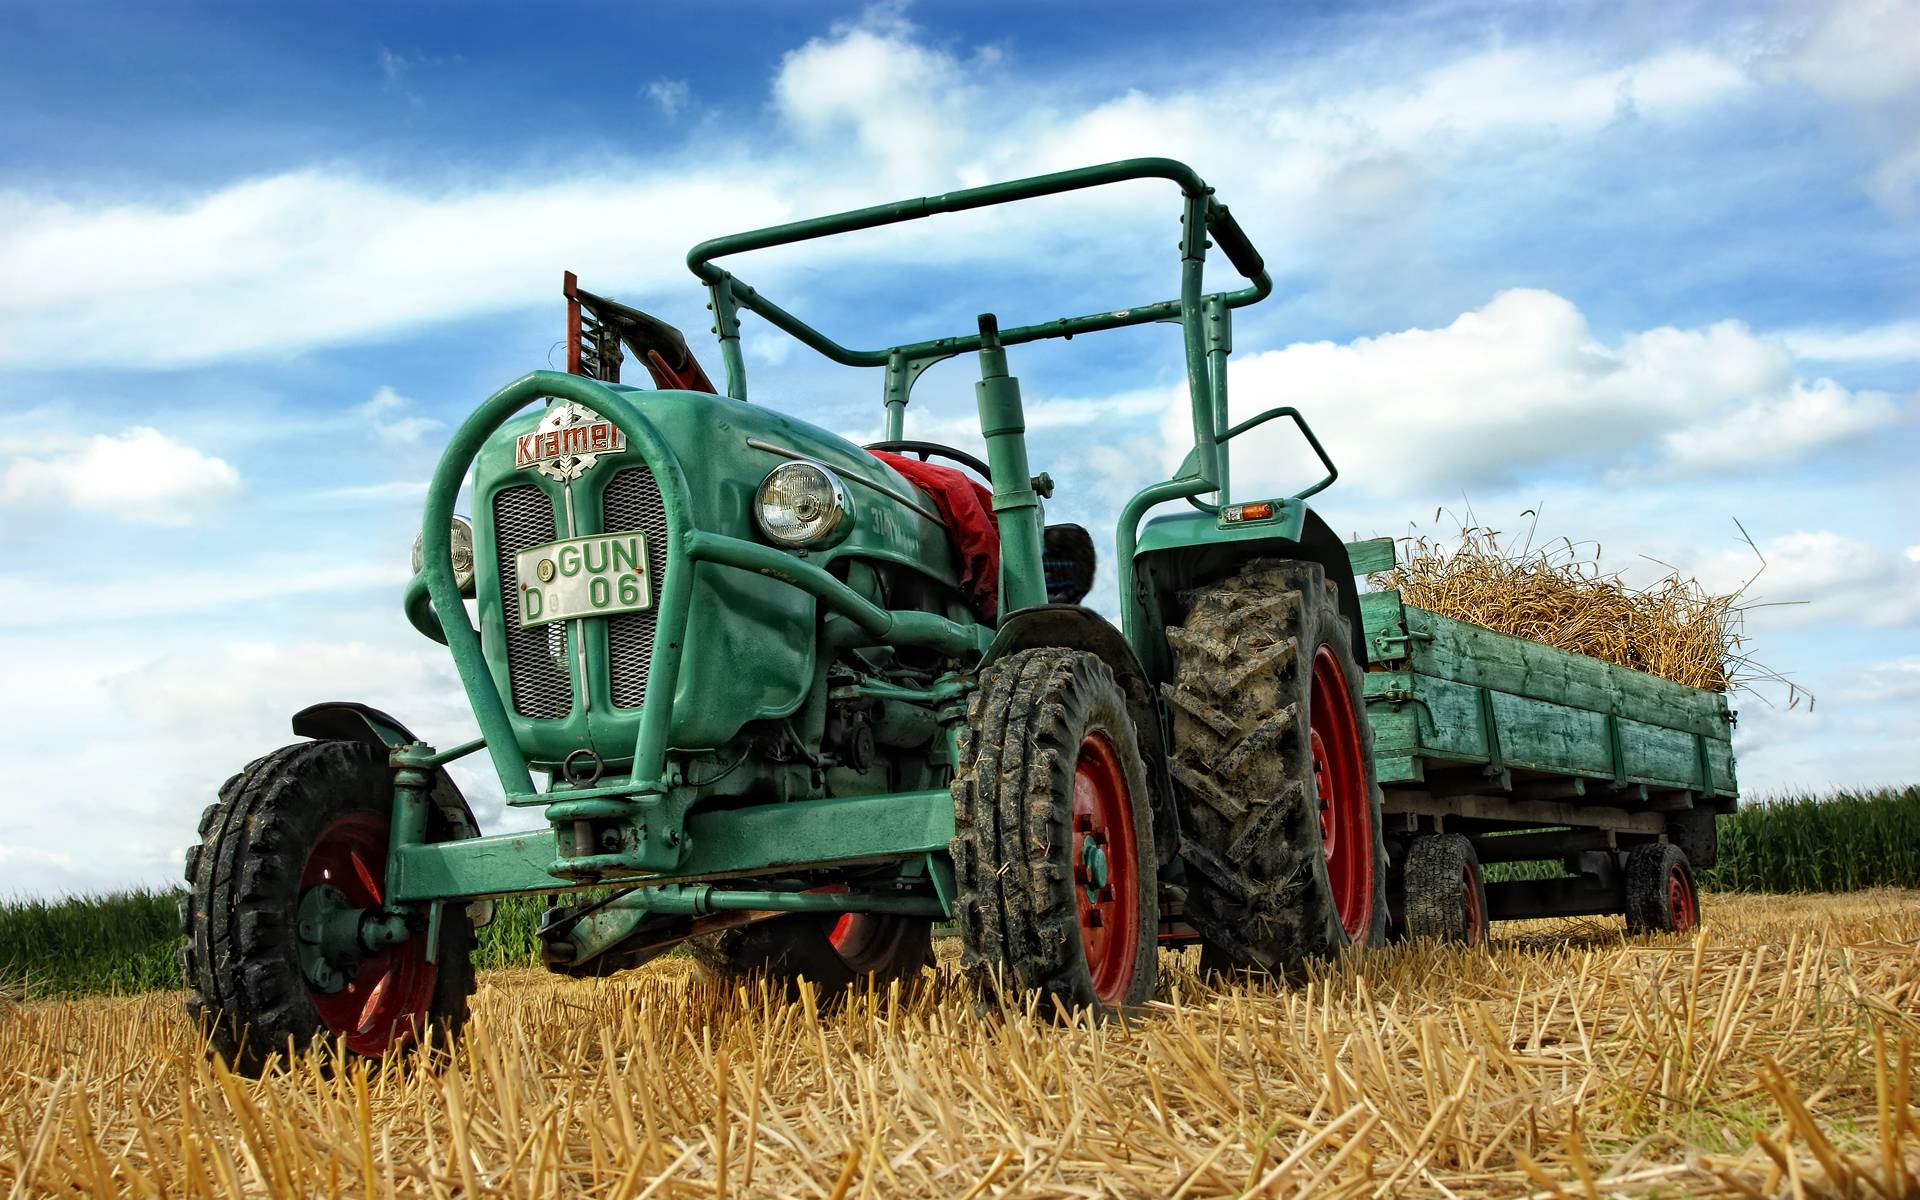 Download Tractor 7448 1920x1200 px High Resolution Wallpapers